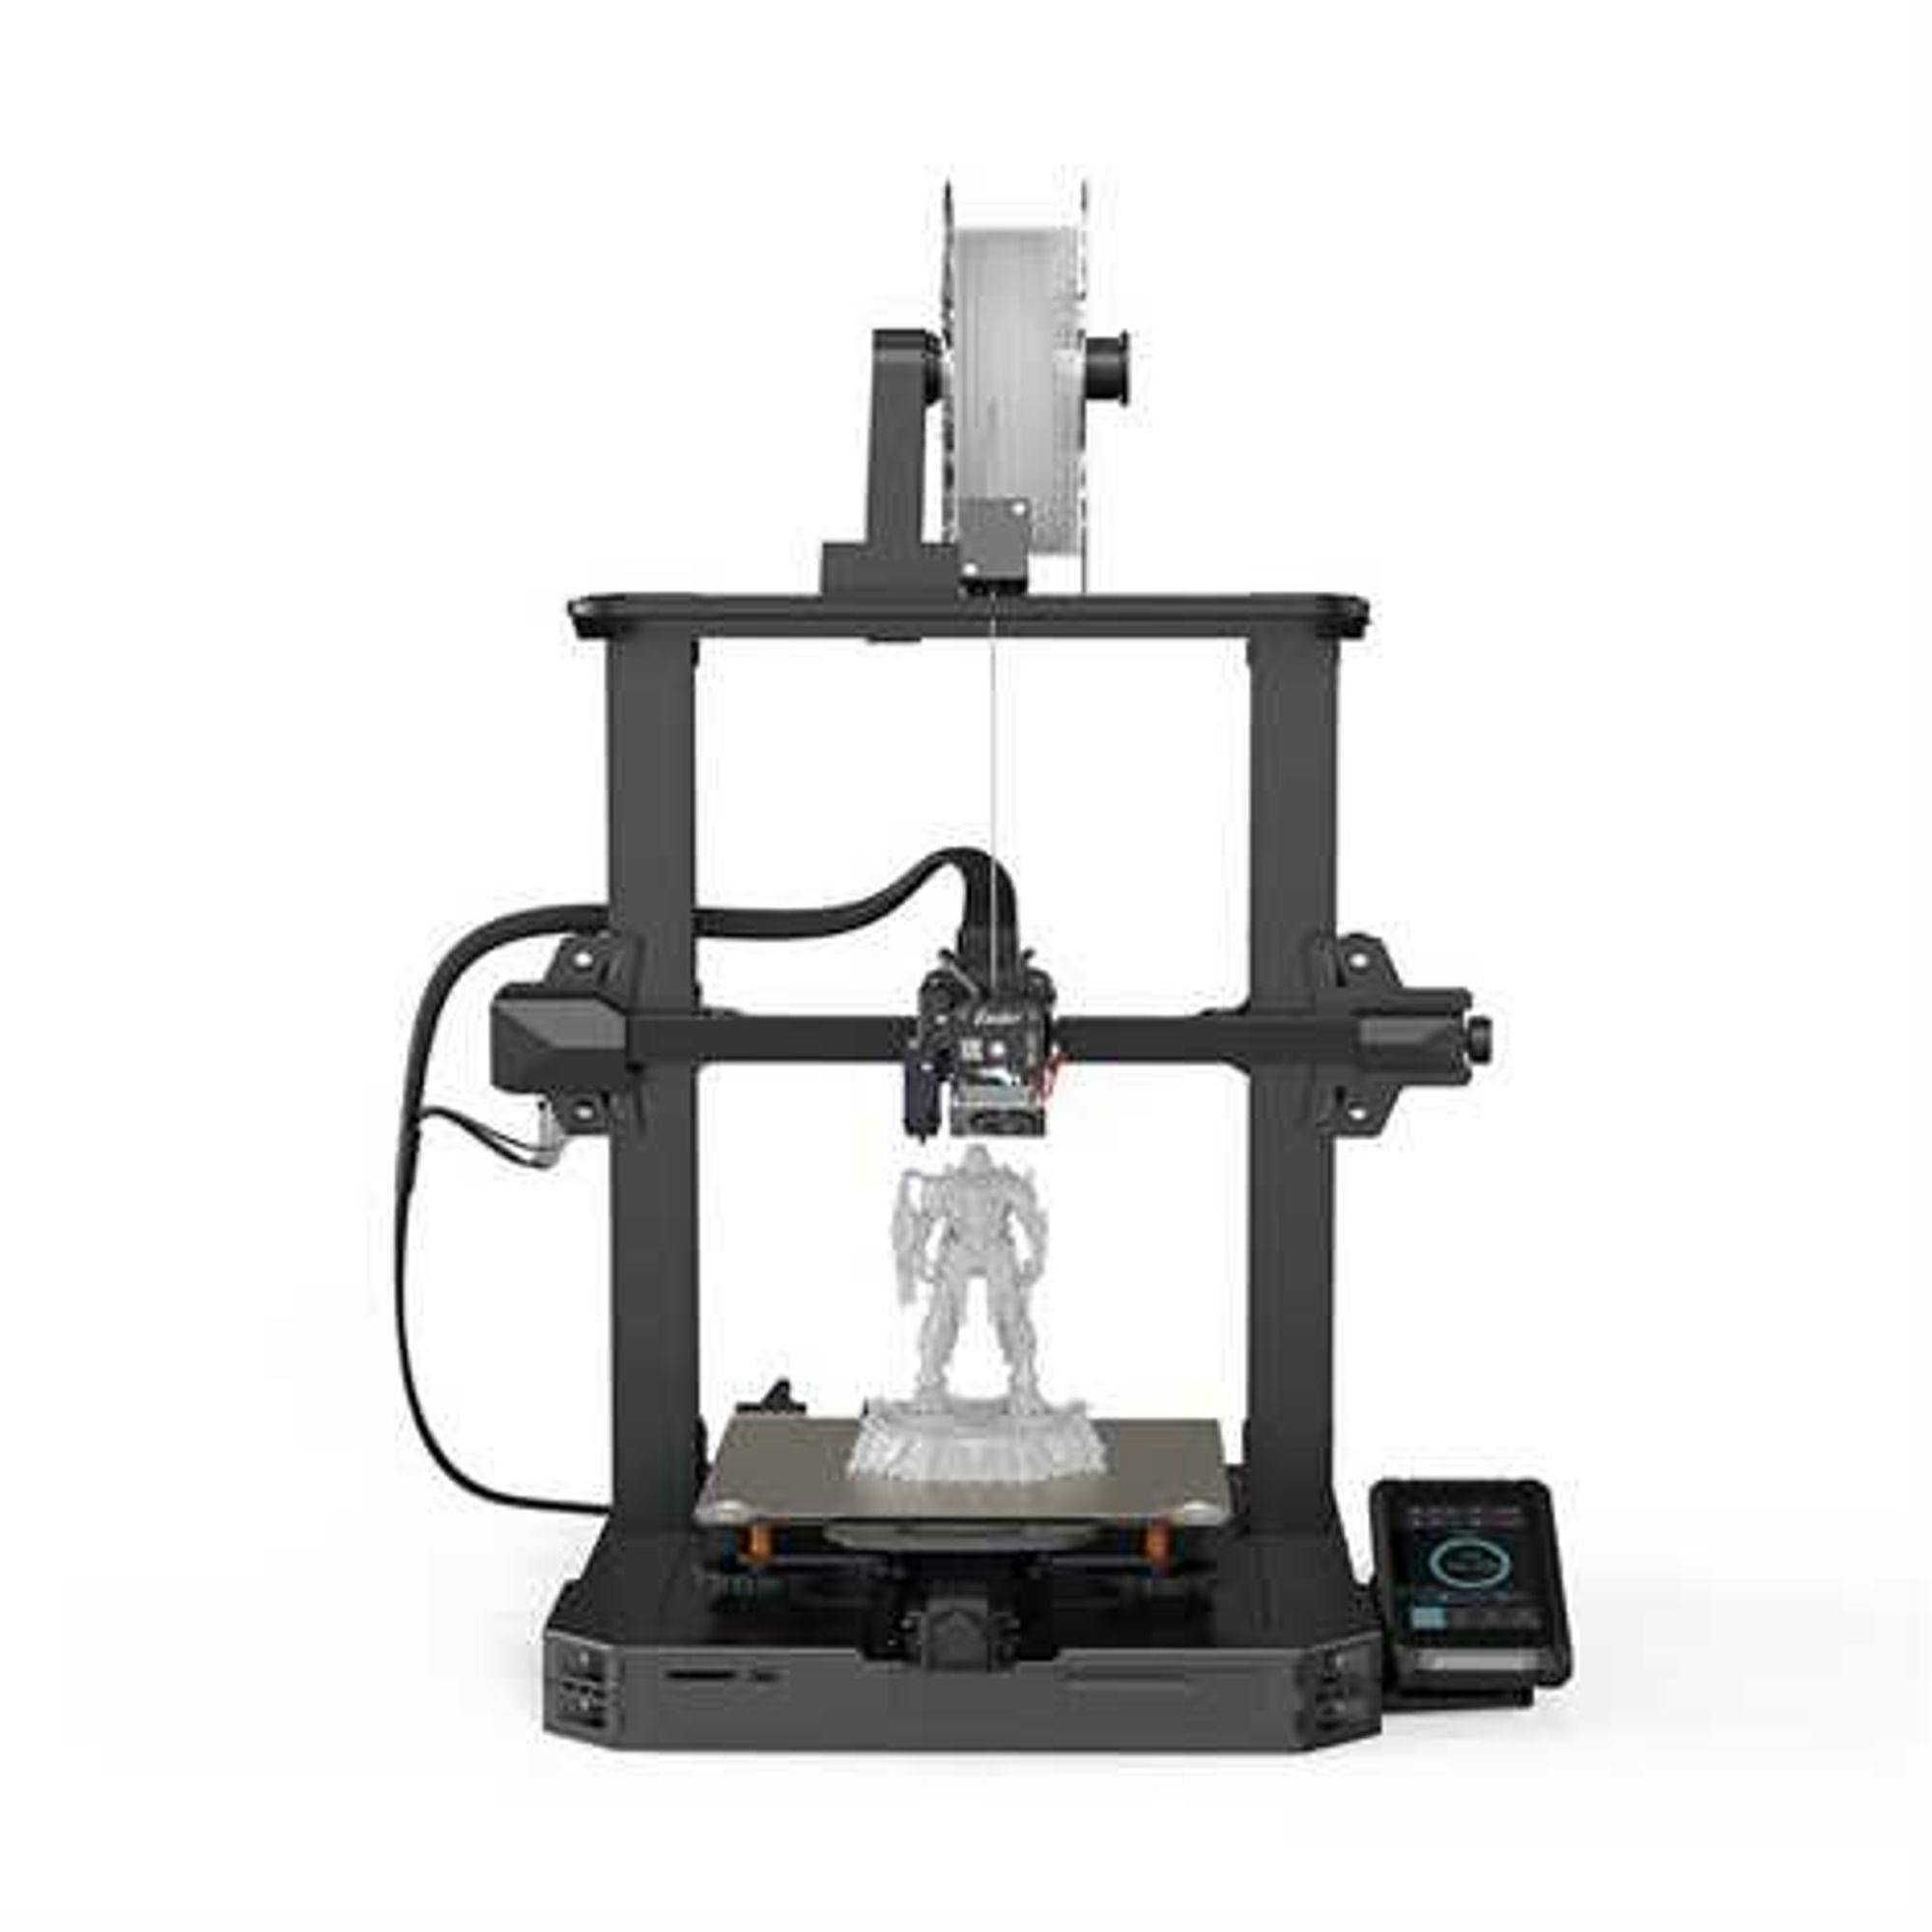 Buy Creality Ender3 S1 PRO 3D Printer - Affordable Price